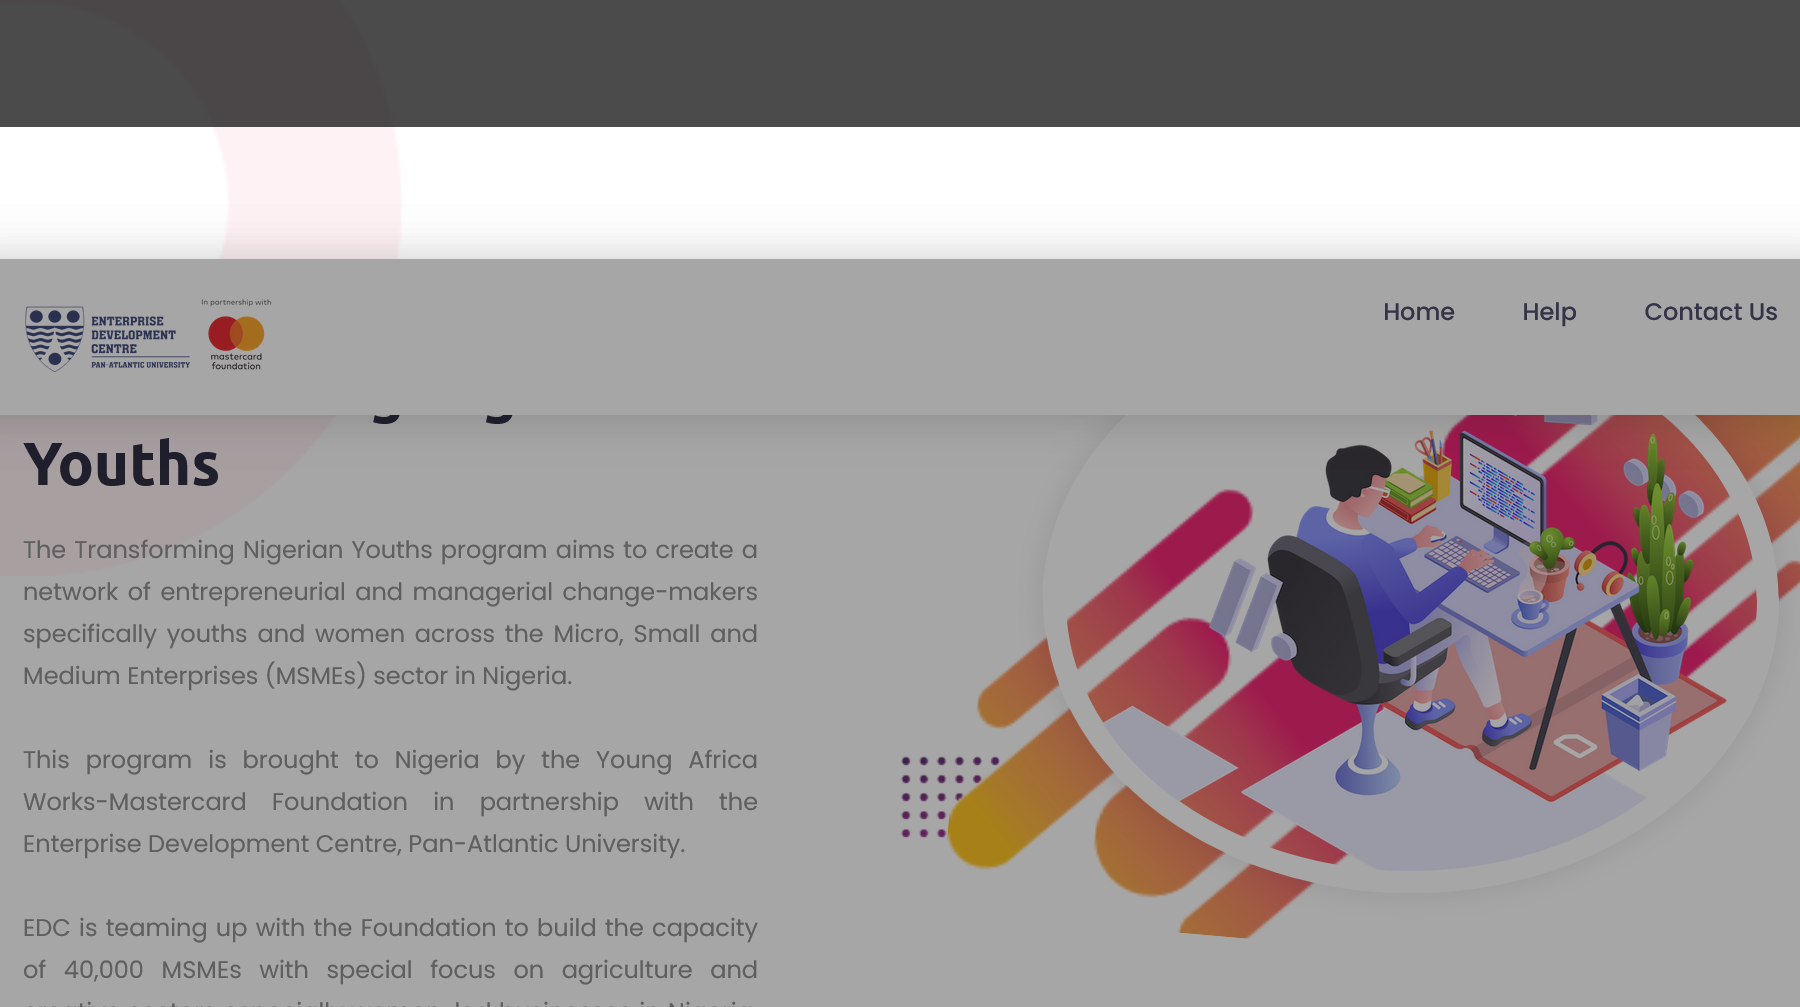 MasterCard - Young Africa Works EDC Transforming Nigerian Youths Program 2024